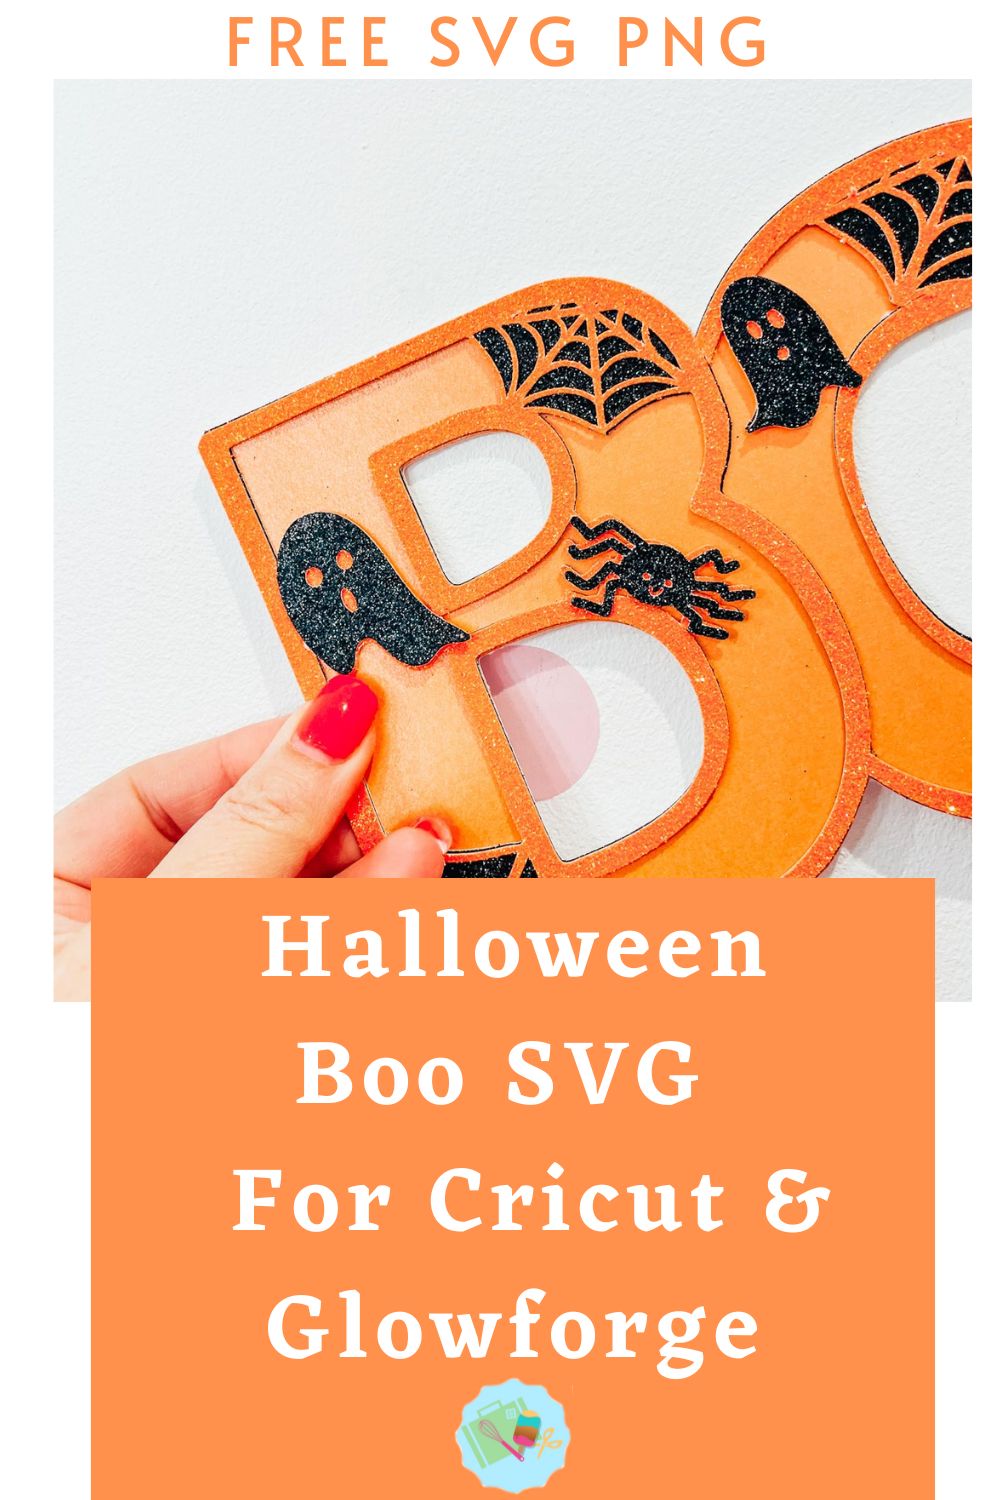 Free Halloween Boo SVG, PNG for Cricut, Glowforge and Silhouette